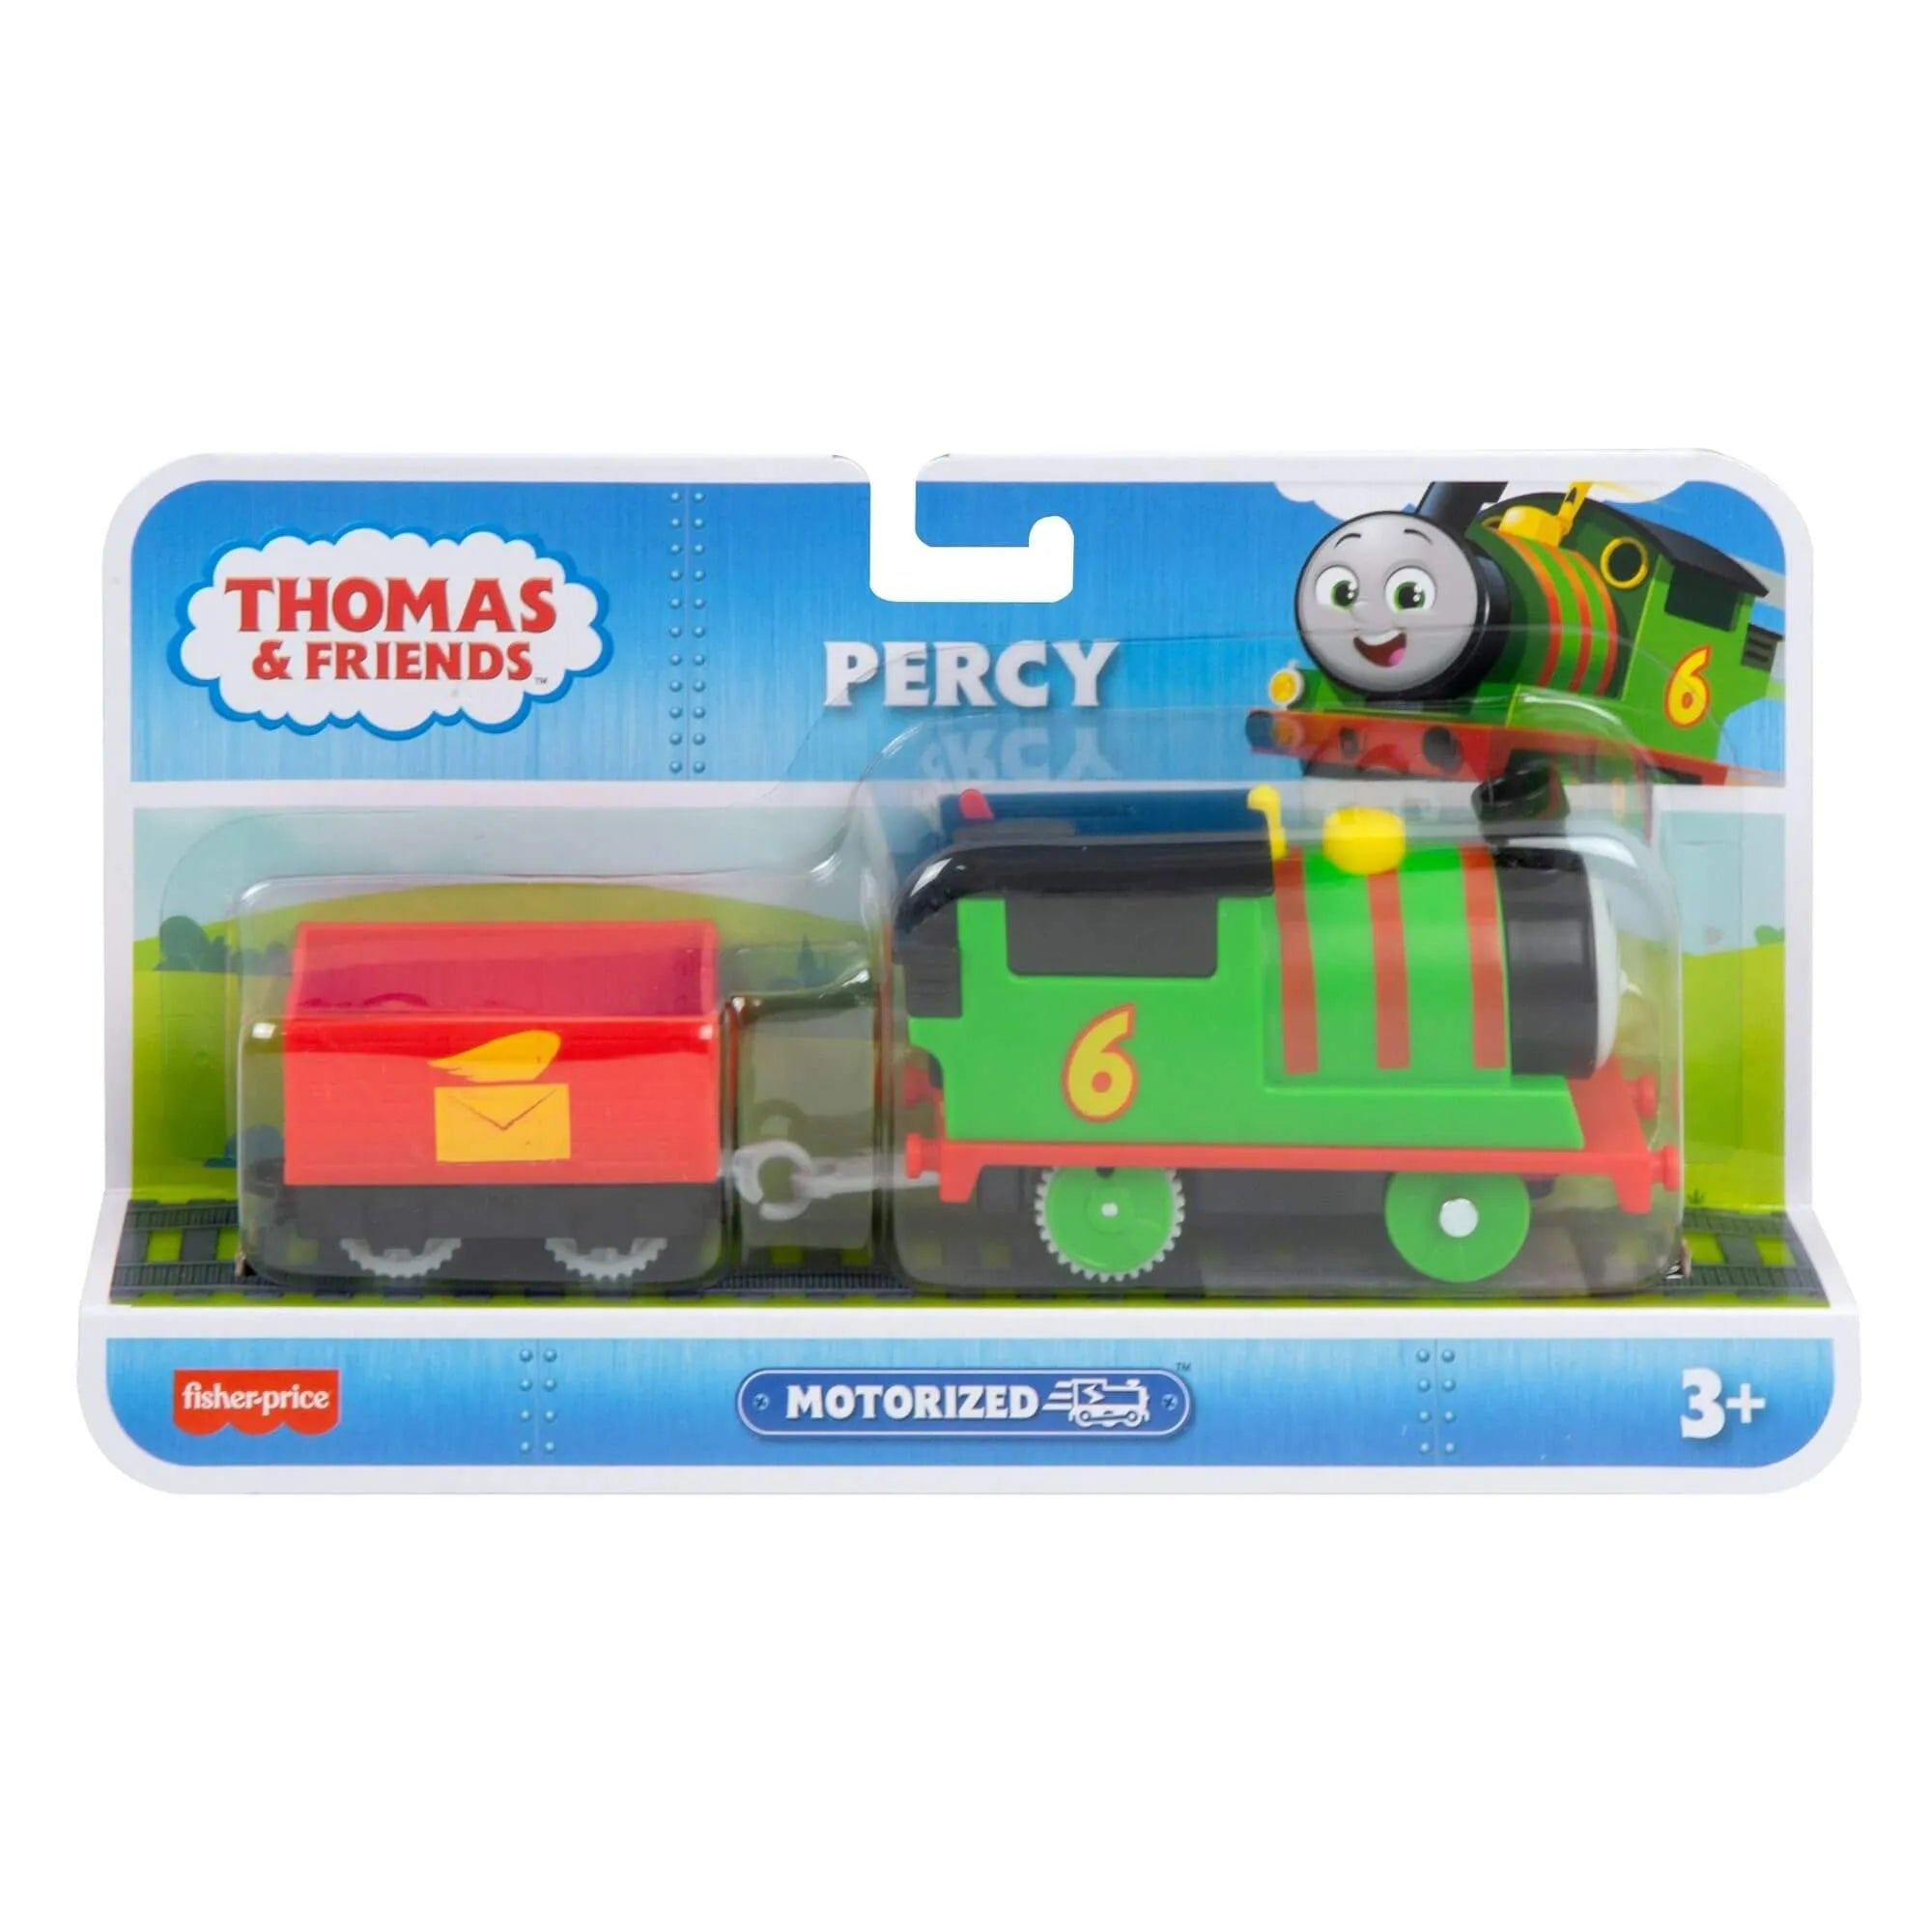 motorized percy thomas and friends - thomas and friends toys - The Toy Room